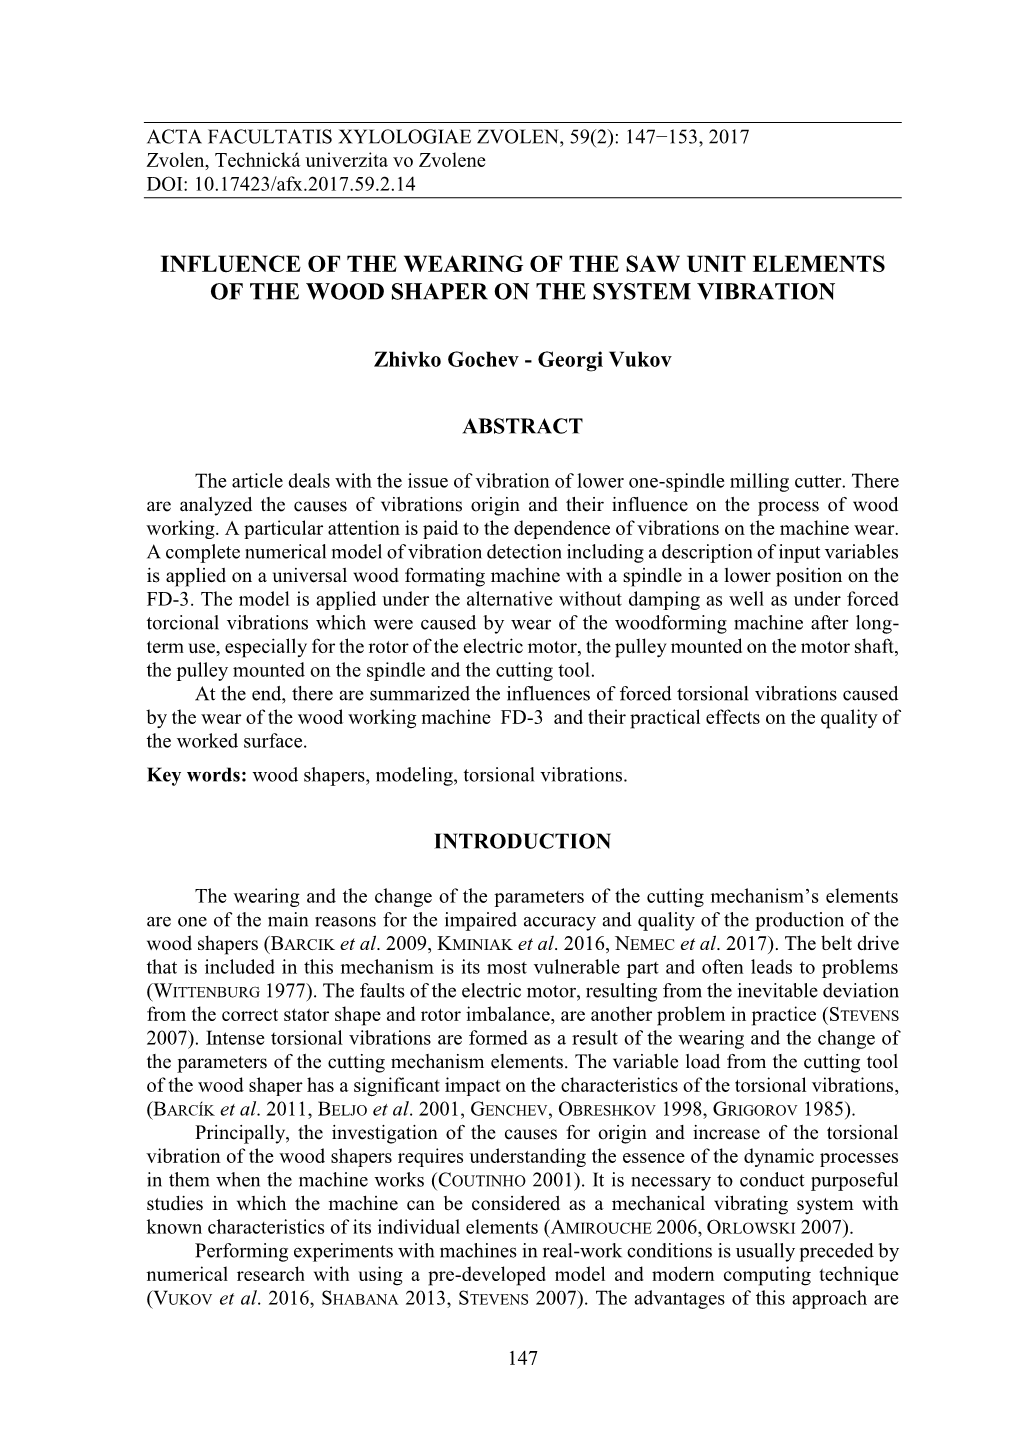 Influence of the Wearing of the Saw Unit Elements of the Wood Shaper on the System Vibration